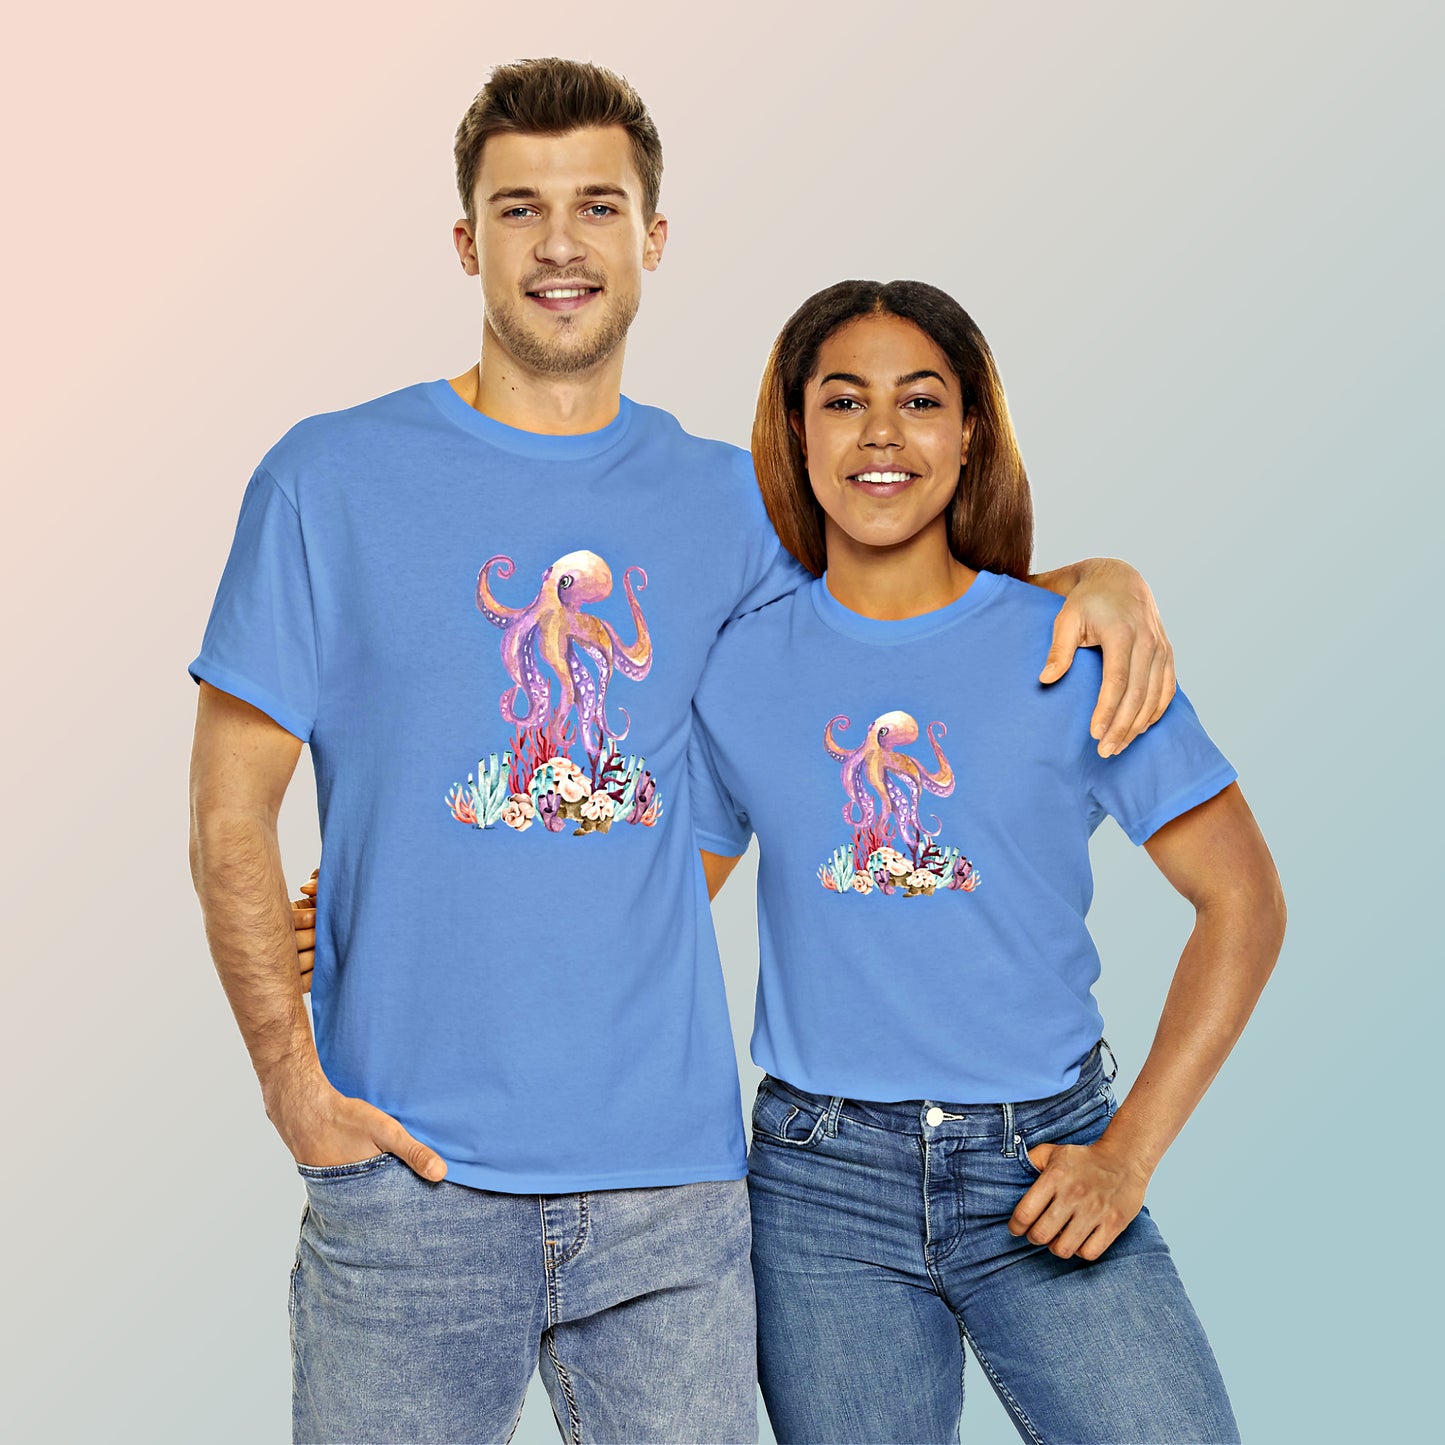 Mock up of a couple; a man and a woman, each wearing the Carolina Blue t-shirt